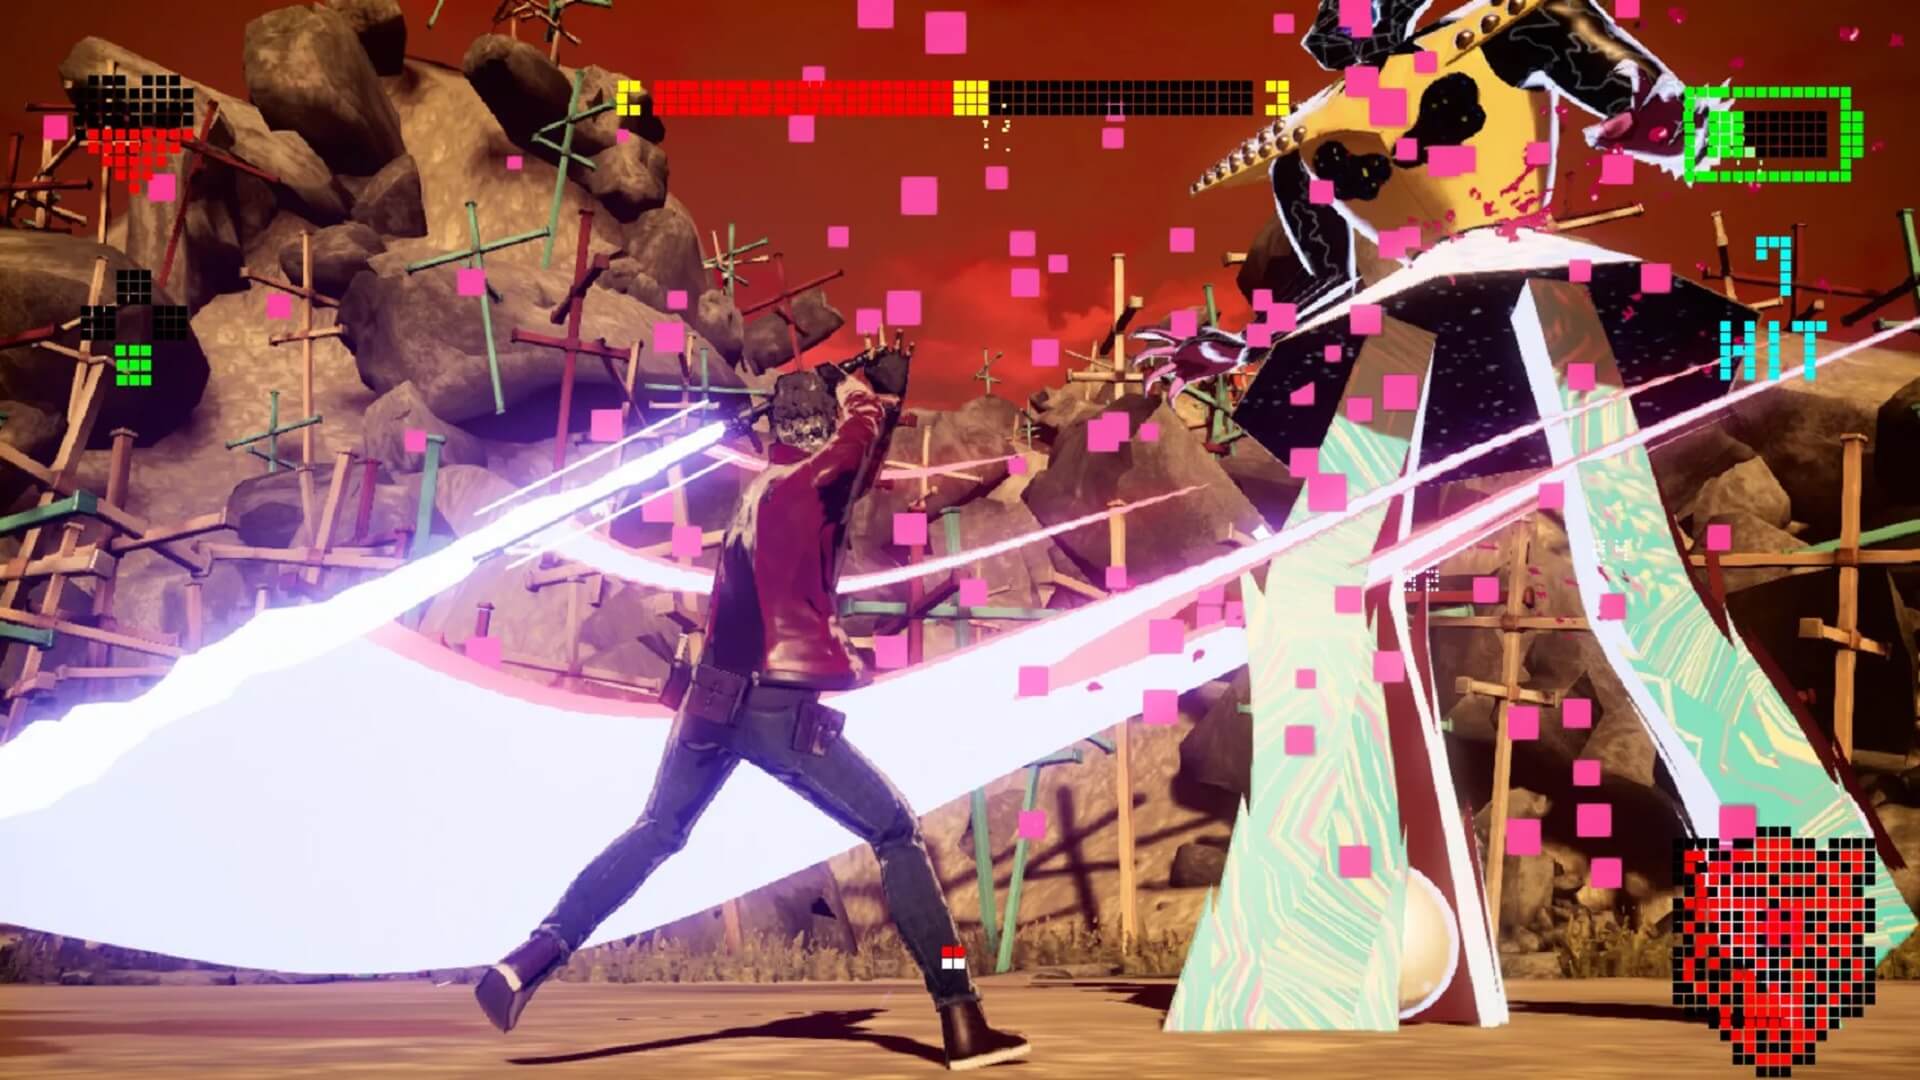 Travis fighting a boss in No More Heroes 3